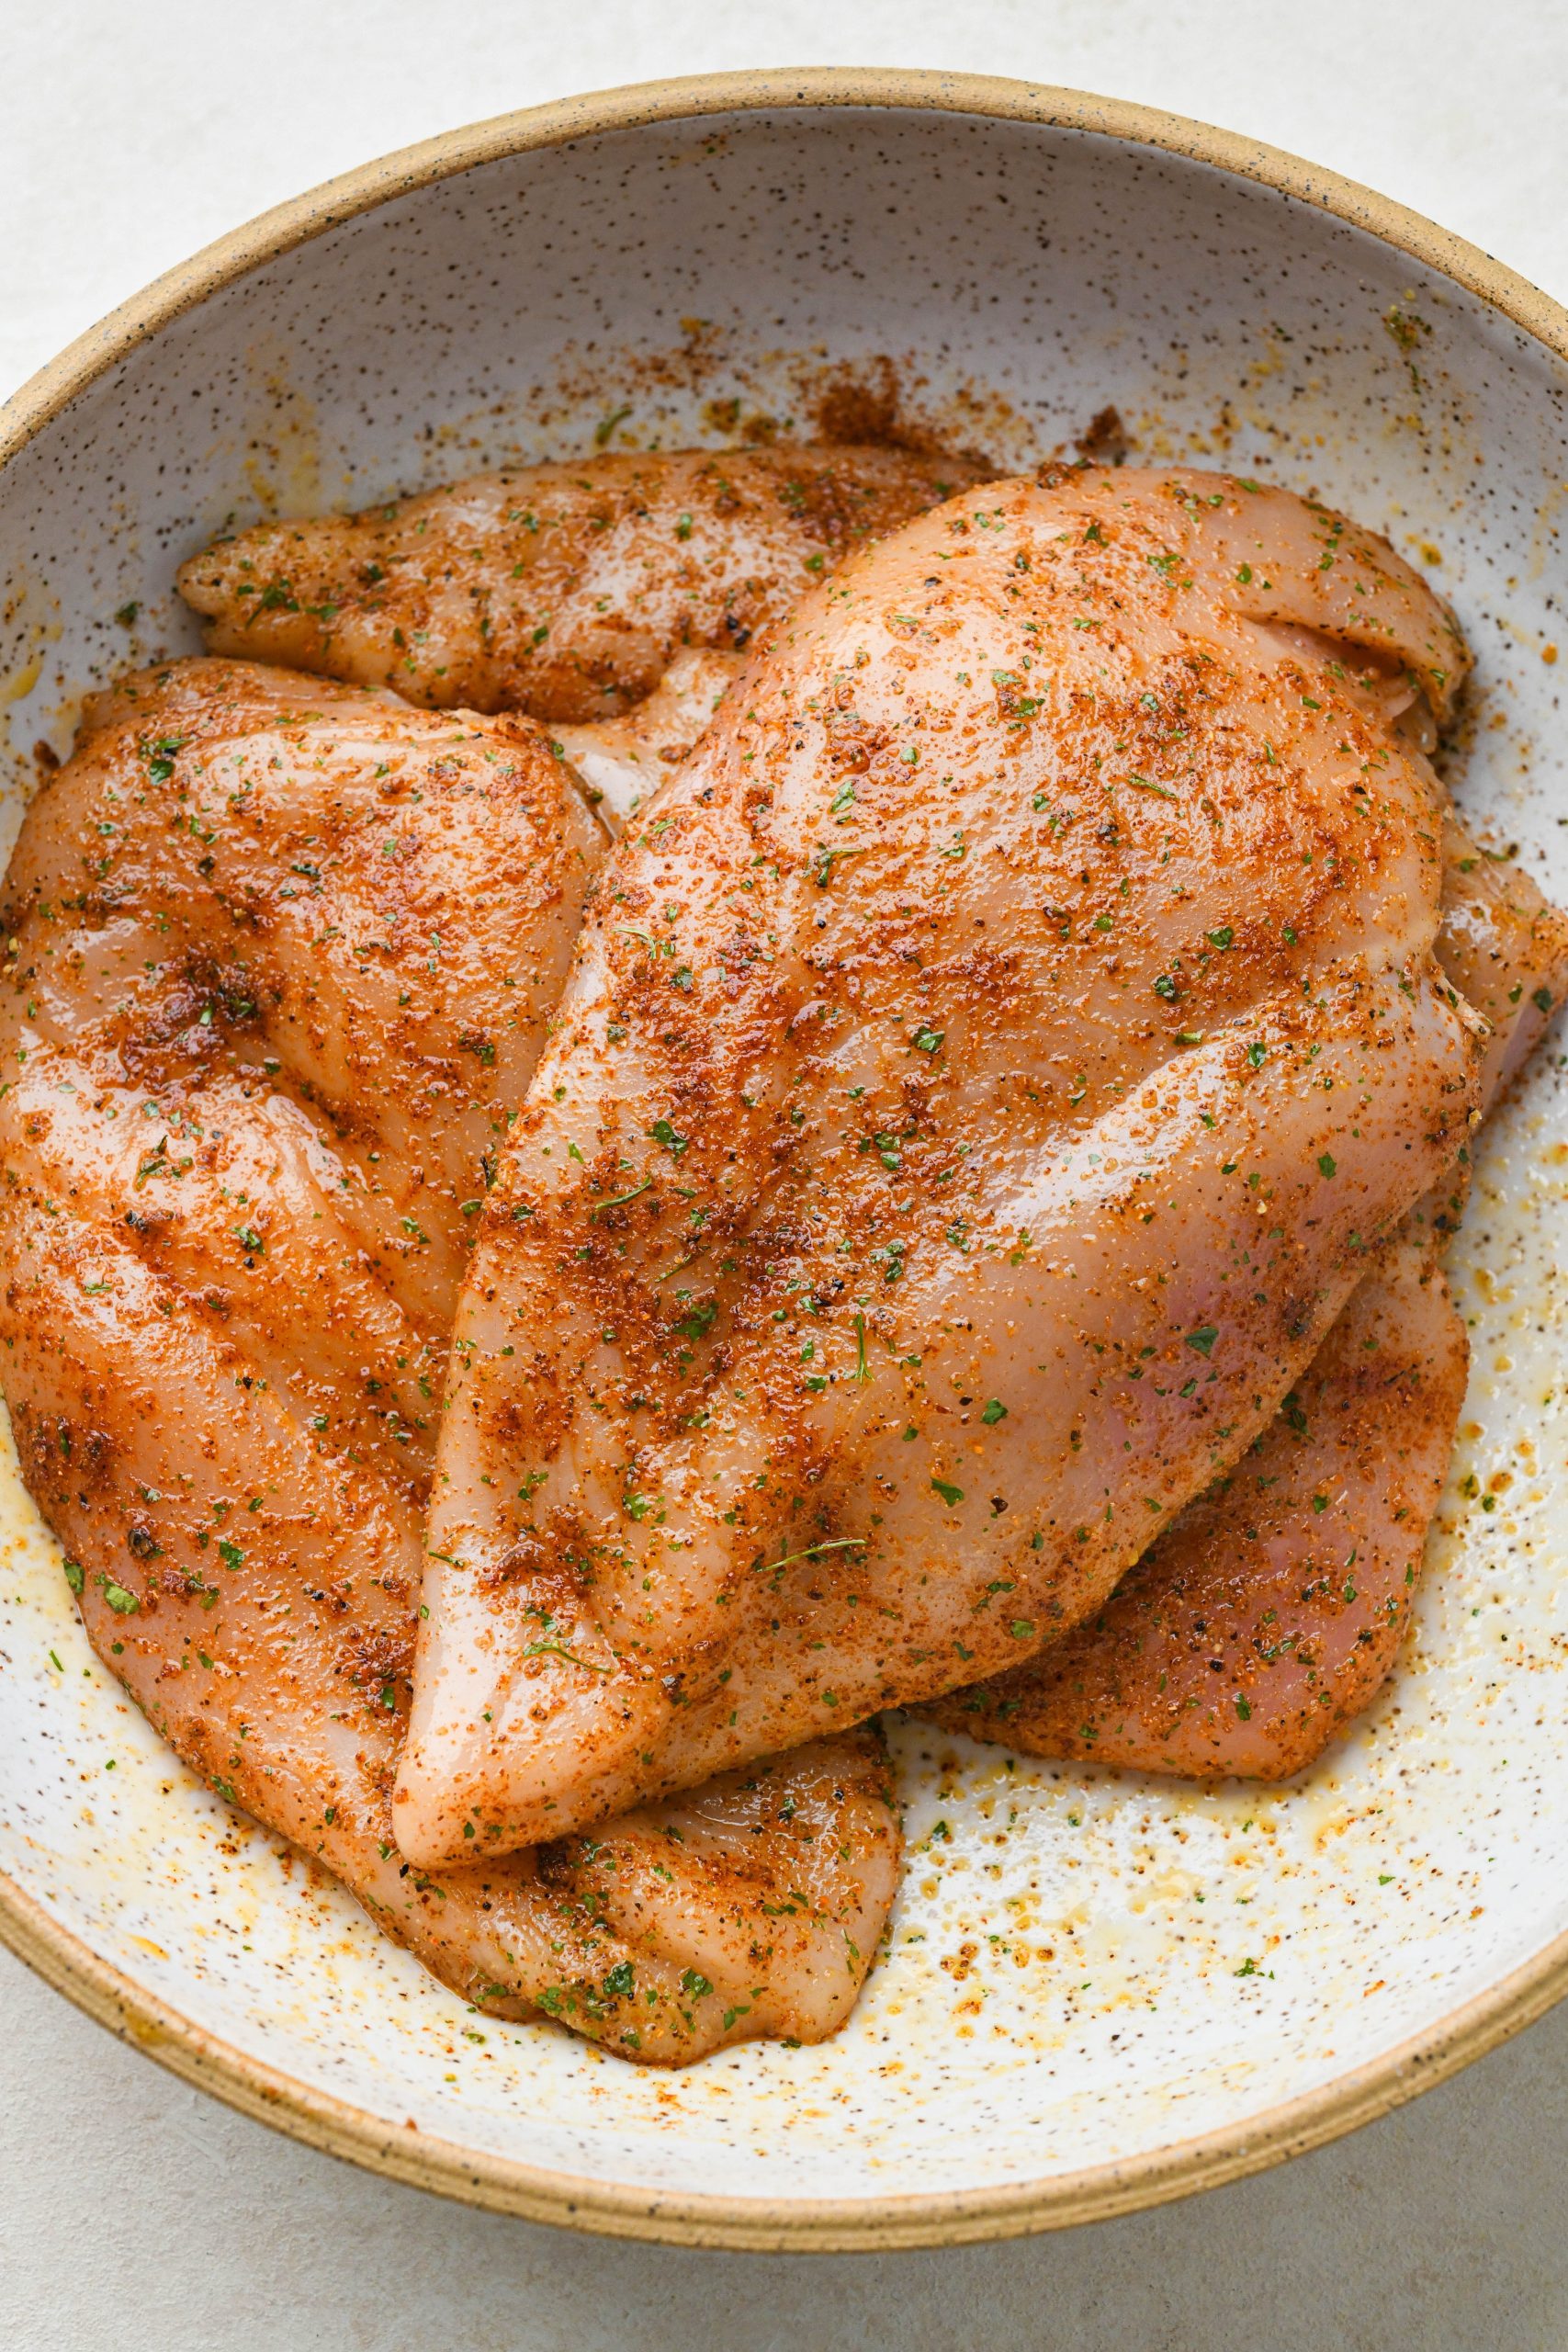 How to make baked chicken breast: Spices and oil evenly coating chicken breasts in a large ceramic bowl